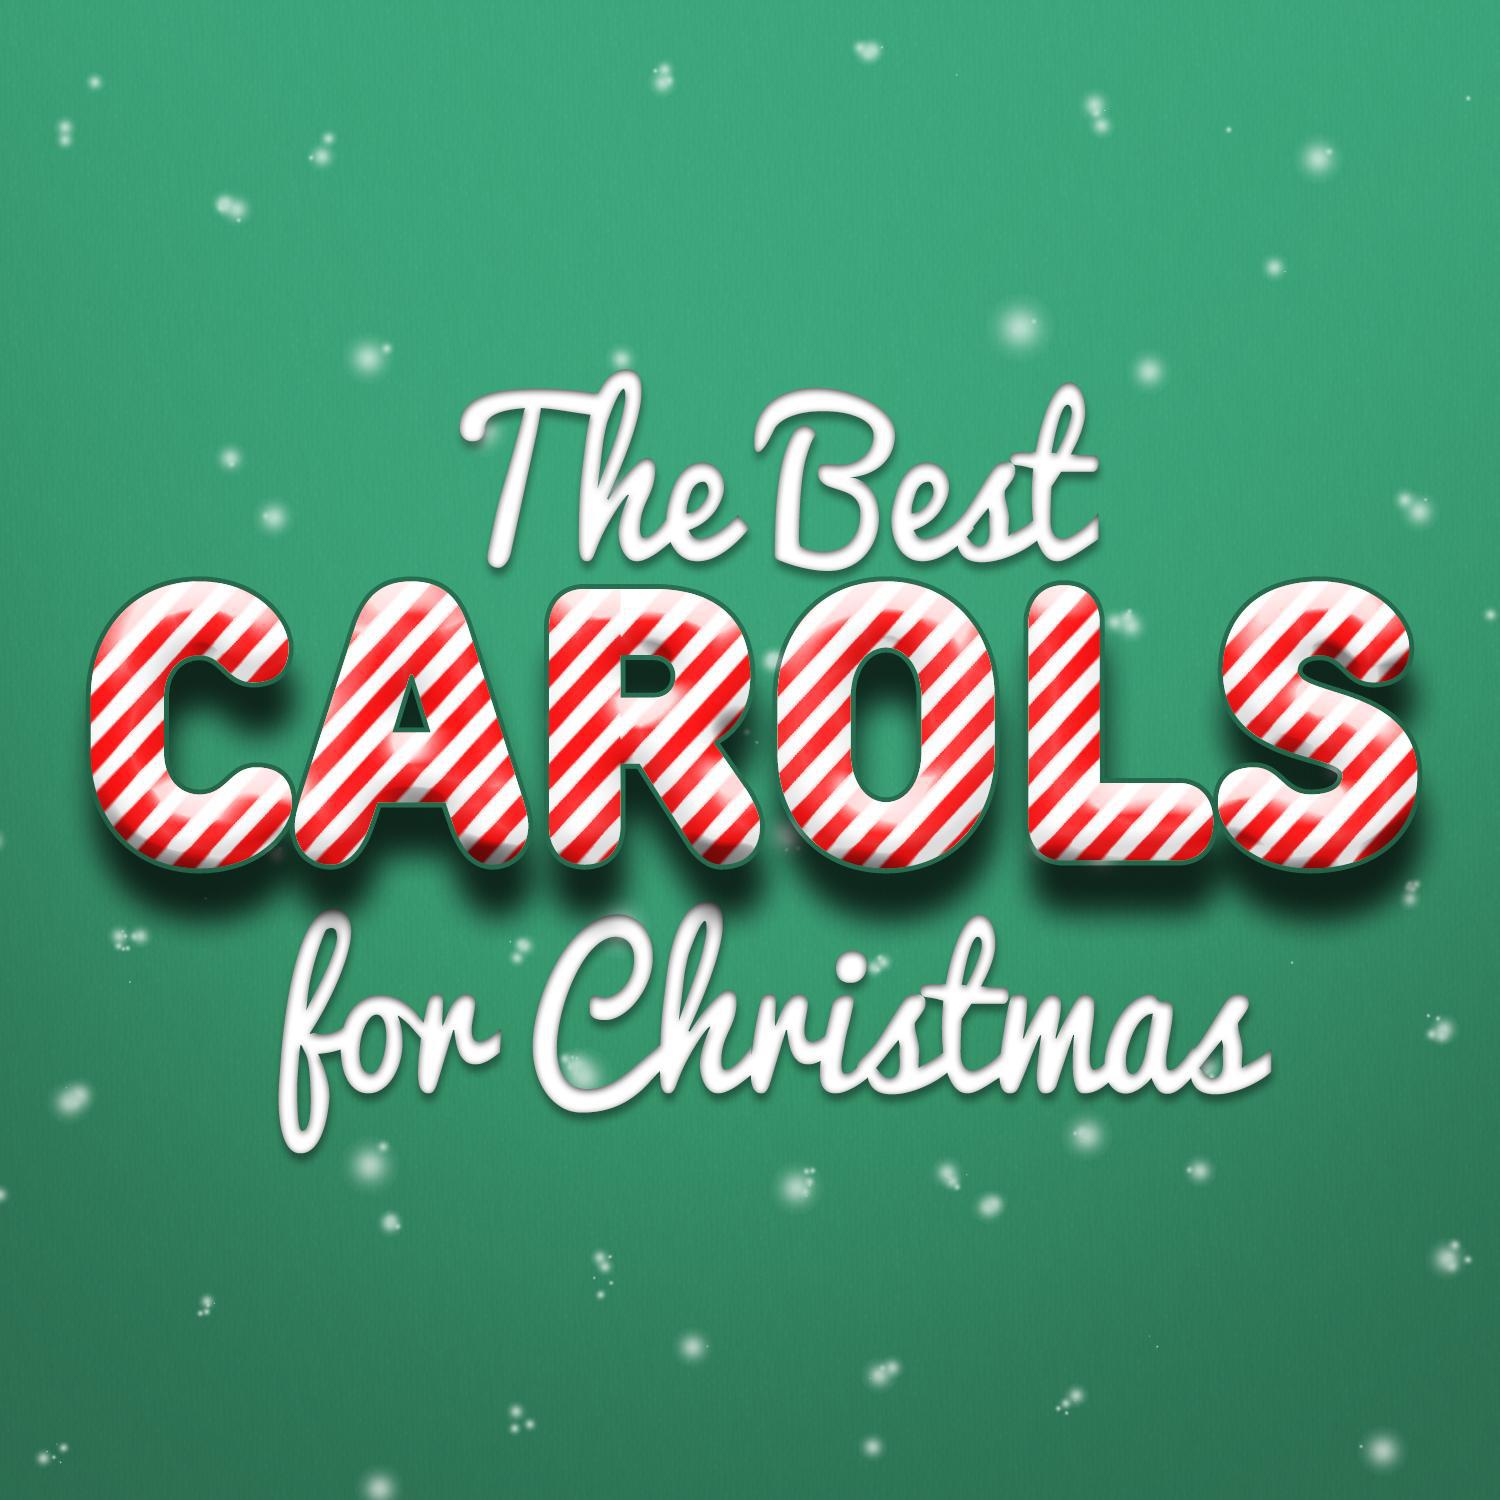 The Best Carols for Christmas